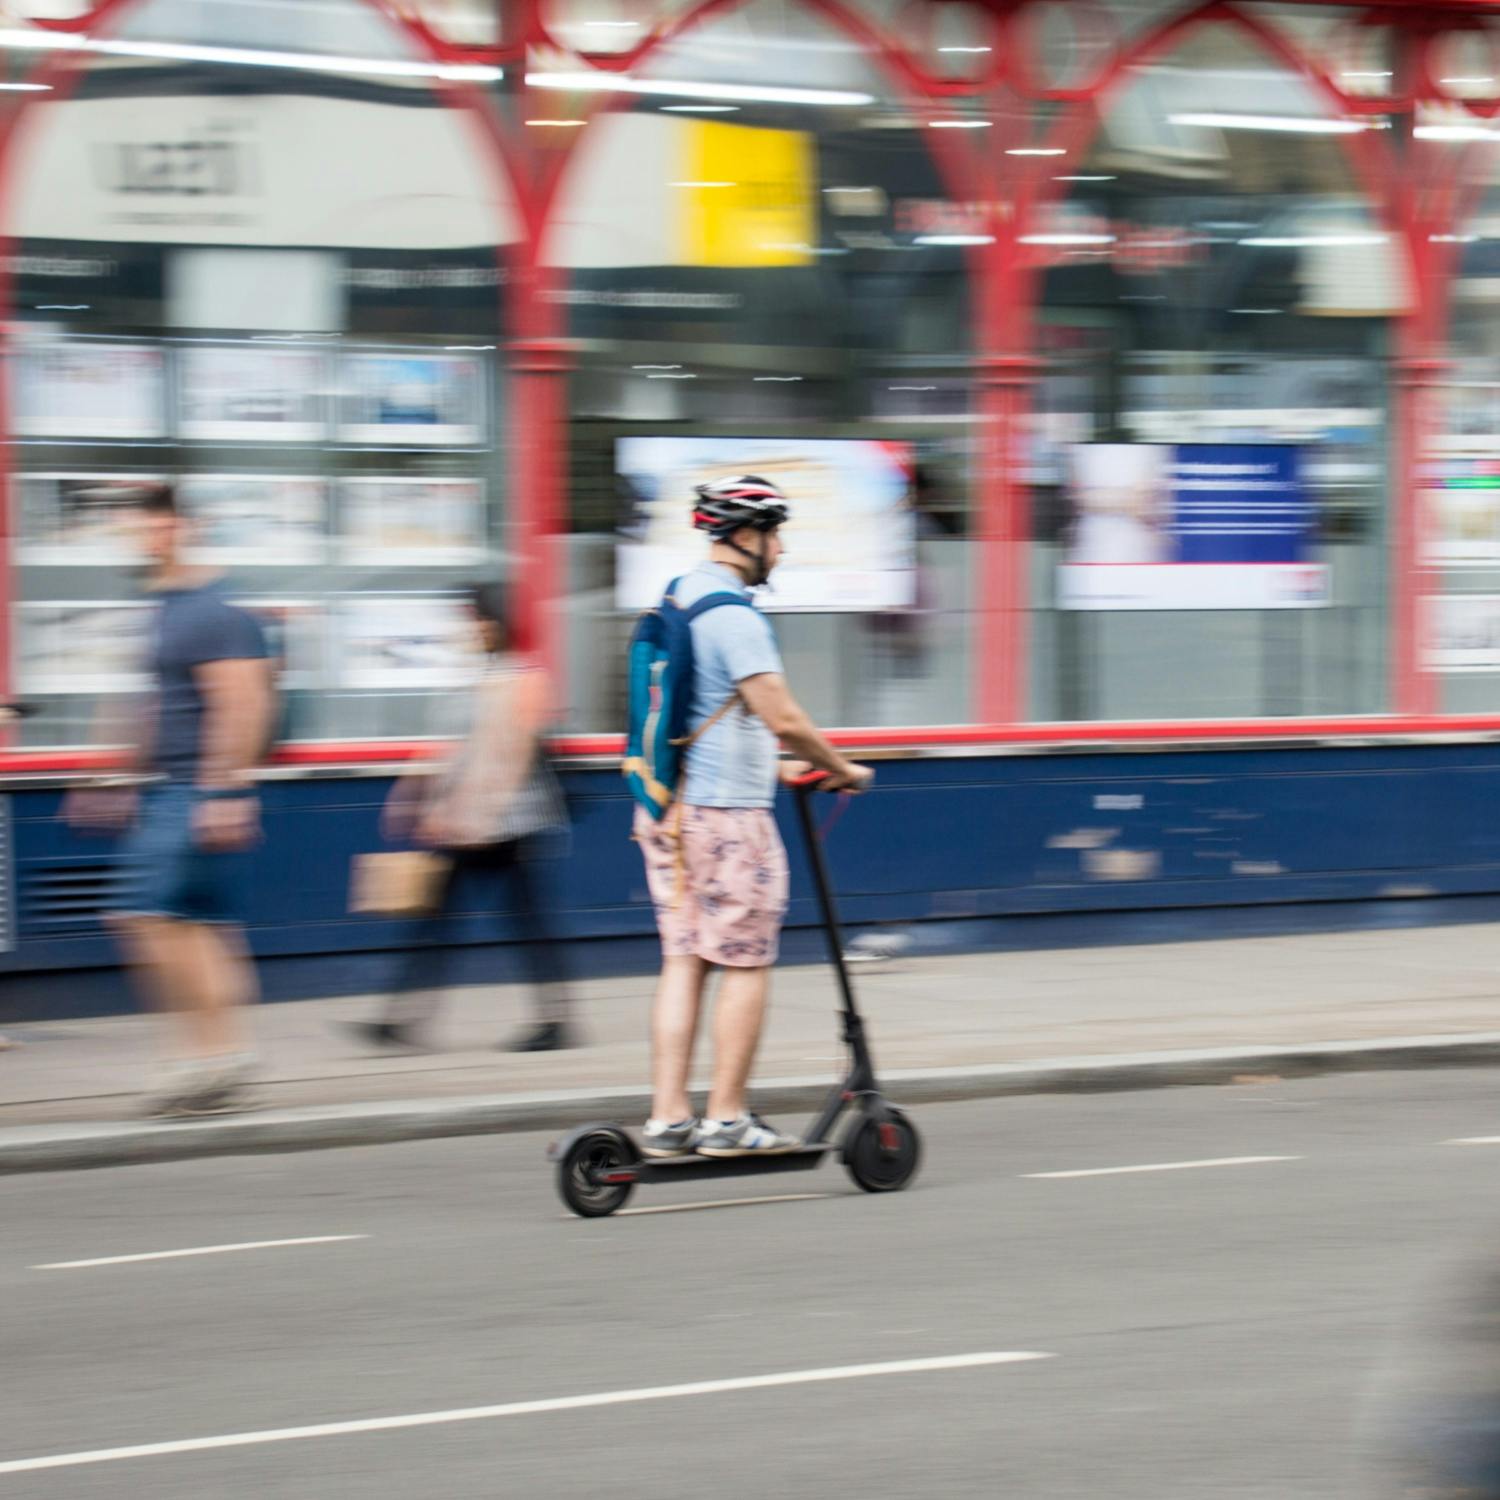 Age Limit Will Be Placed On Those Who Can Use E-Scooters, RSA Says